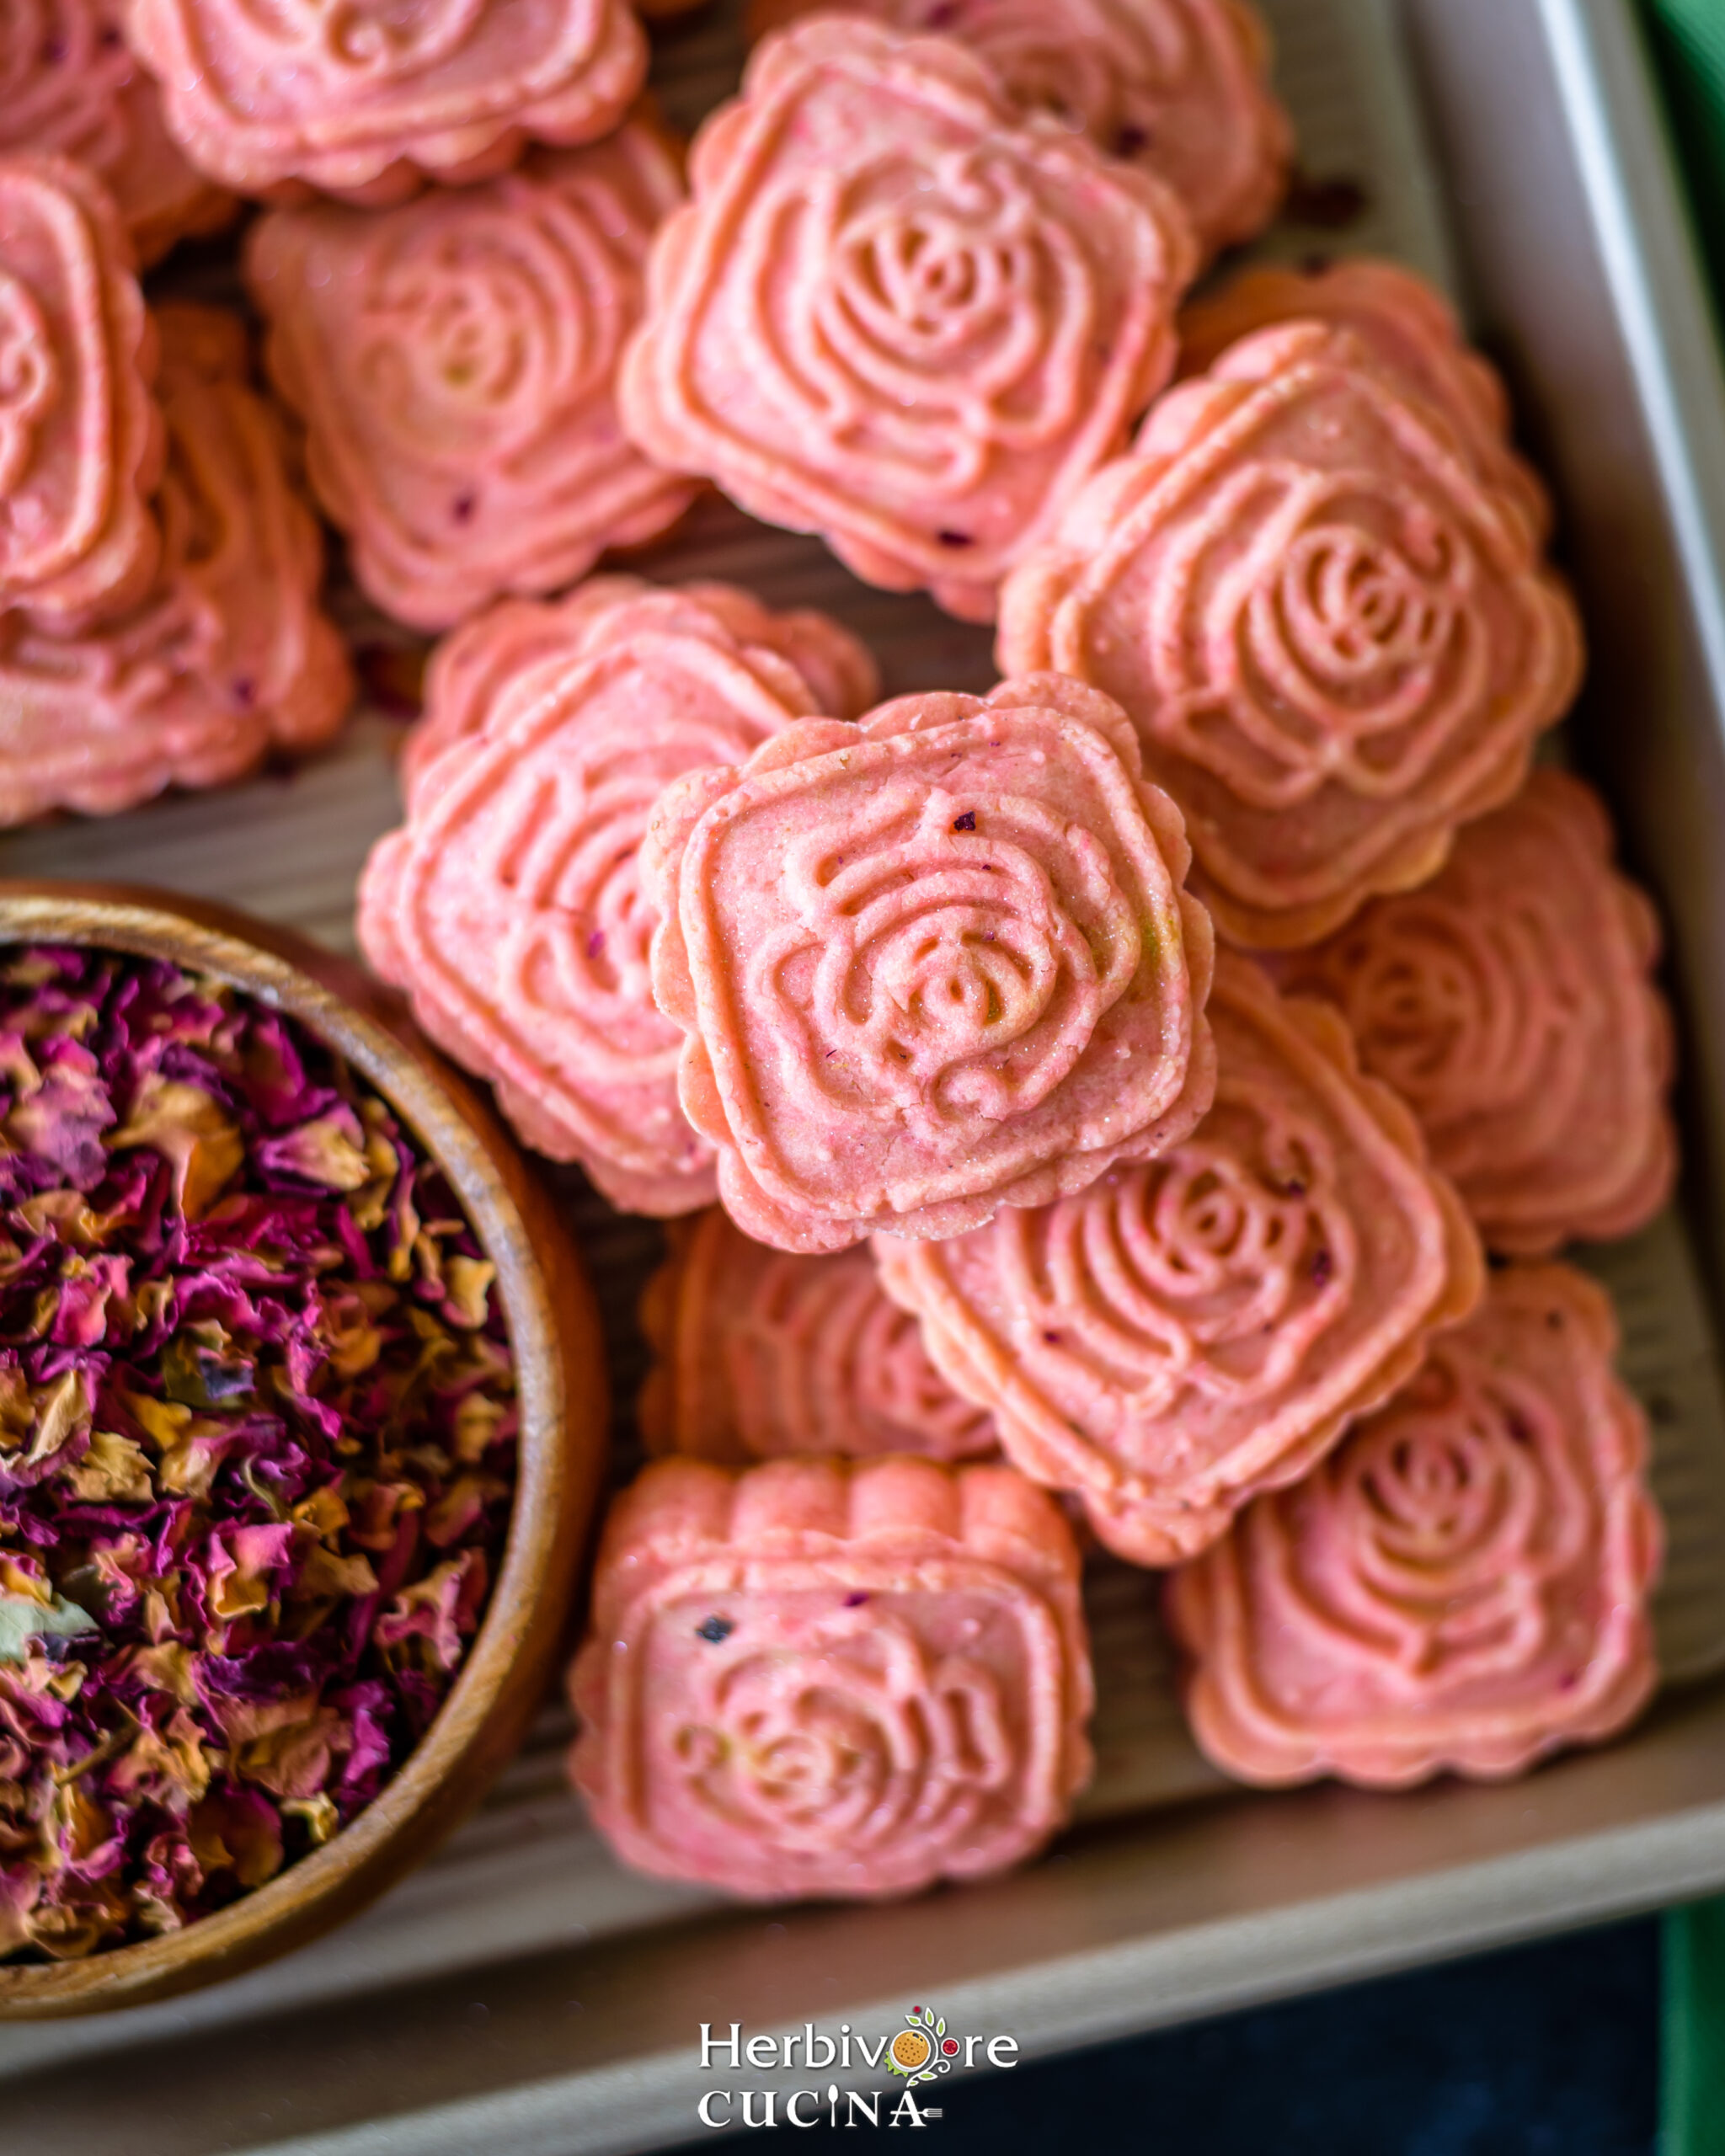 A baking tray with rose cardamom cookies and some dried rose petals in a small wooden bowl. 